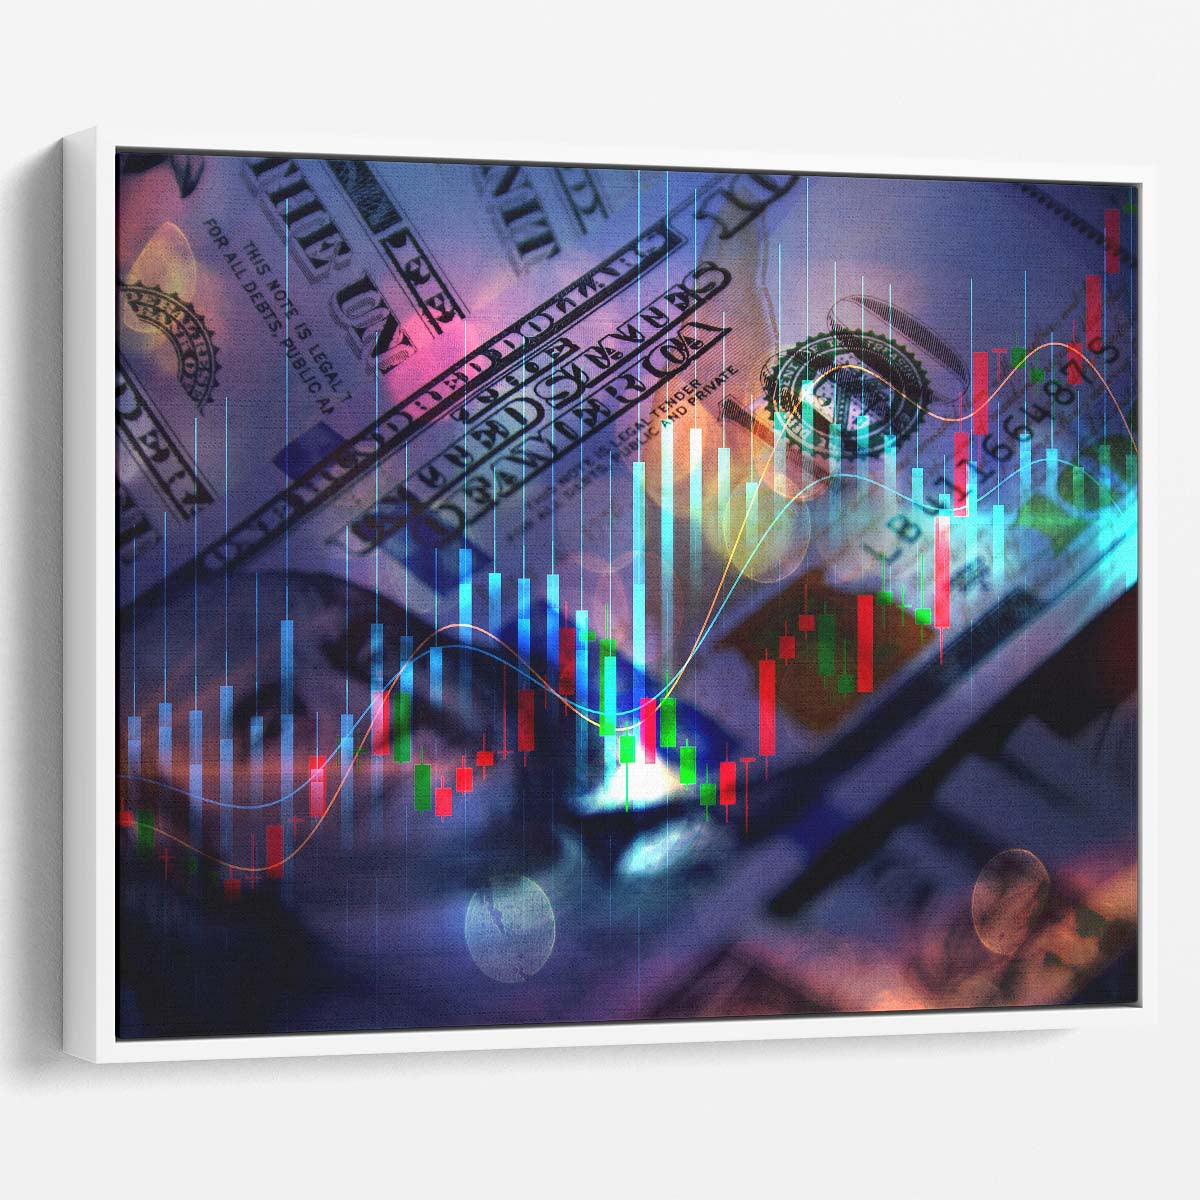 Stock Market Candle Stick Wall Art by Luxuriance Designs. Made in USA.